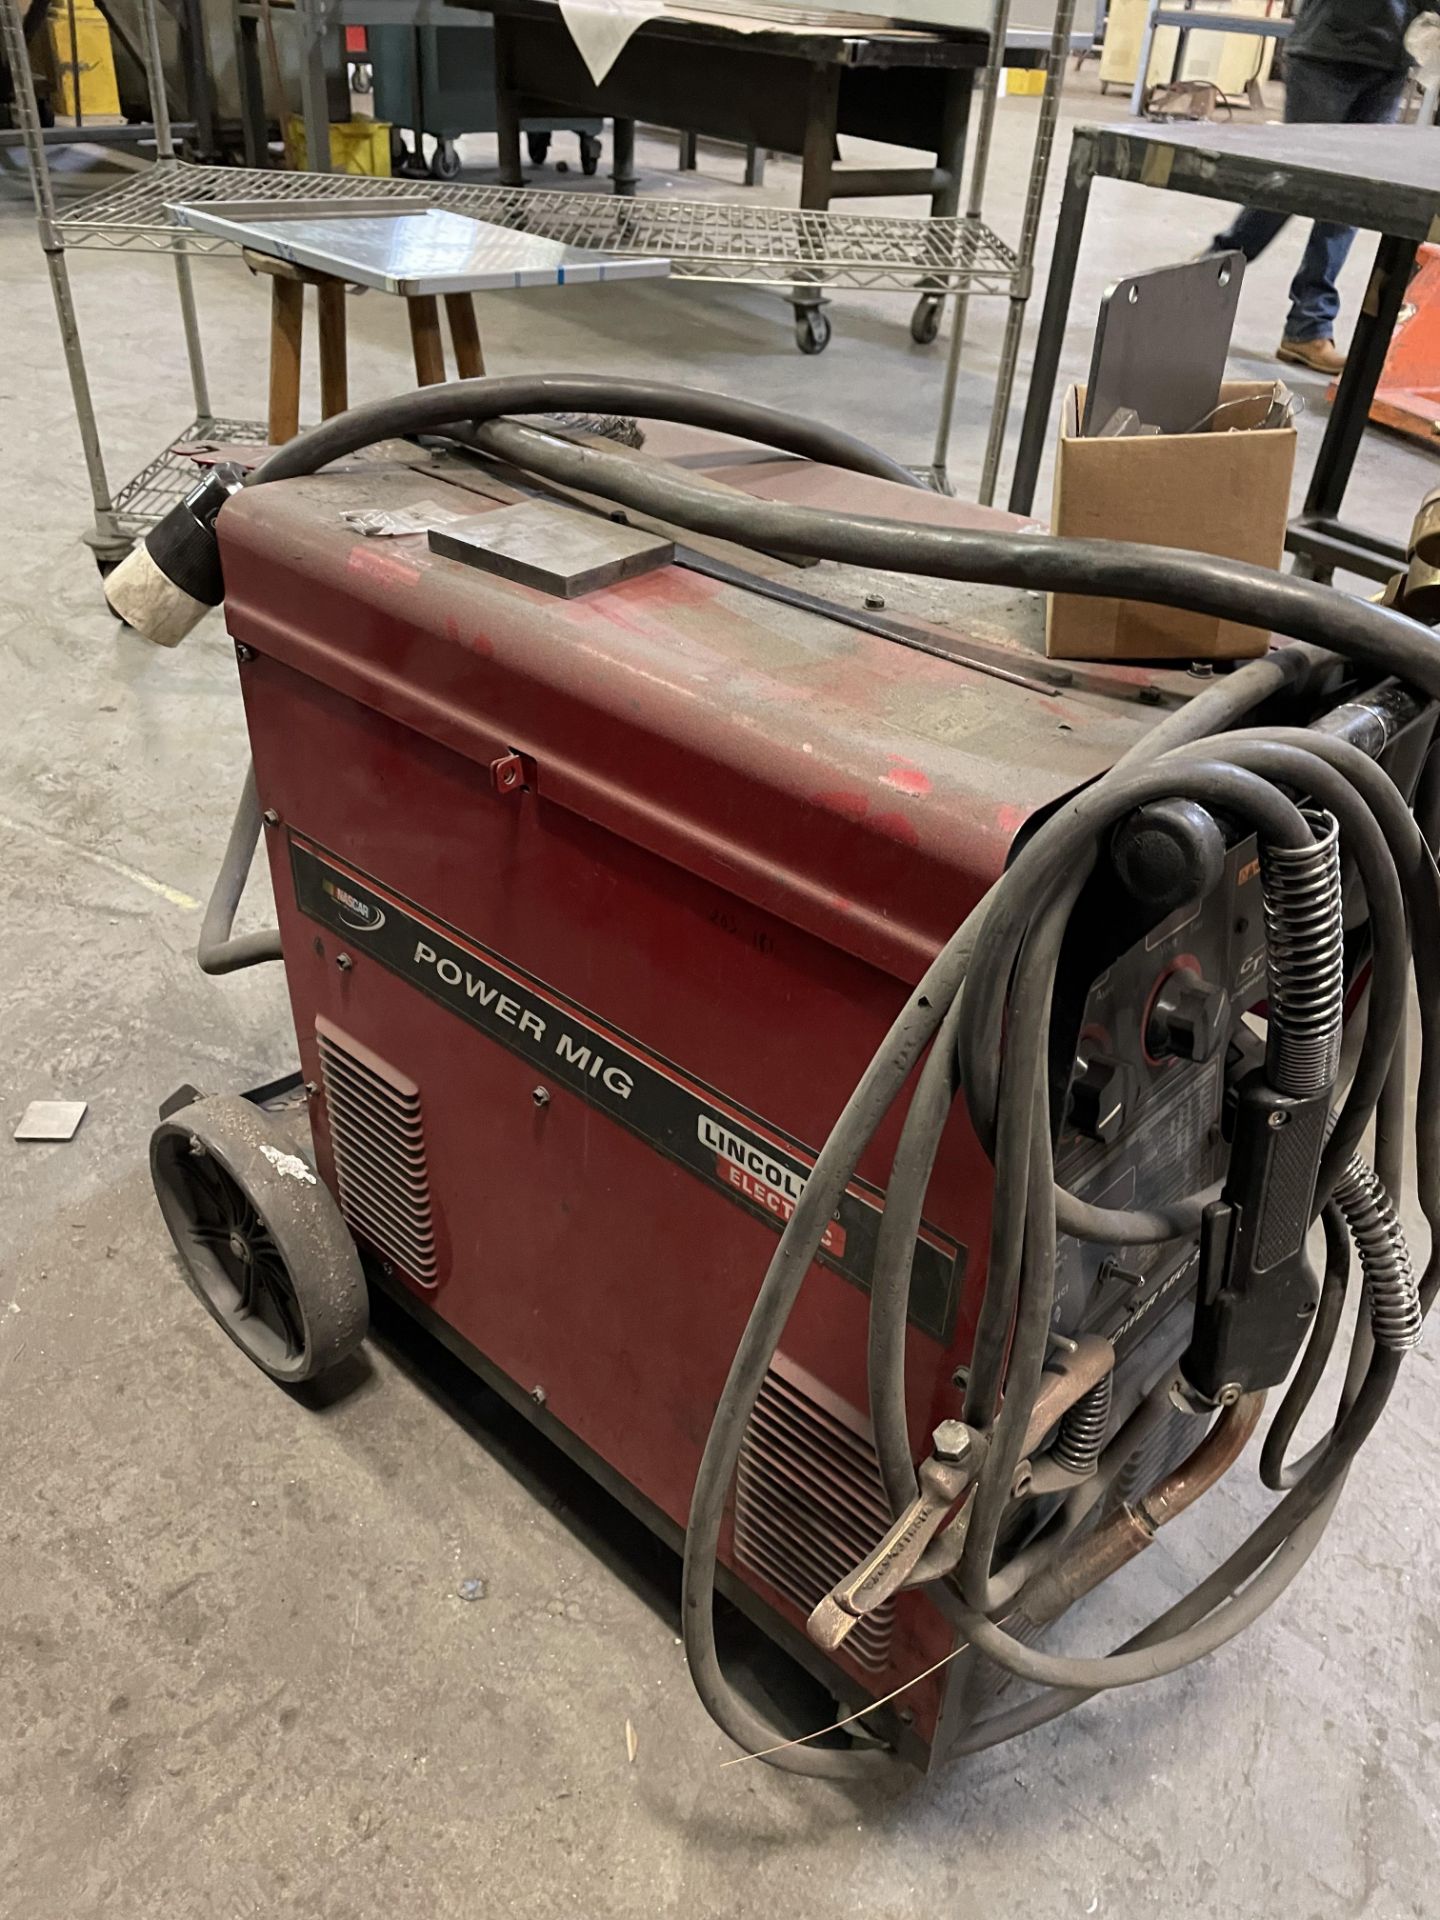 Lincoln Power Mig 350 MP Mig Welder - Image 3 of 3